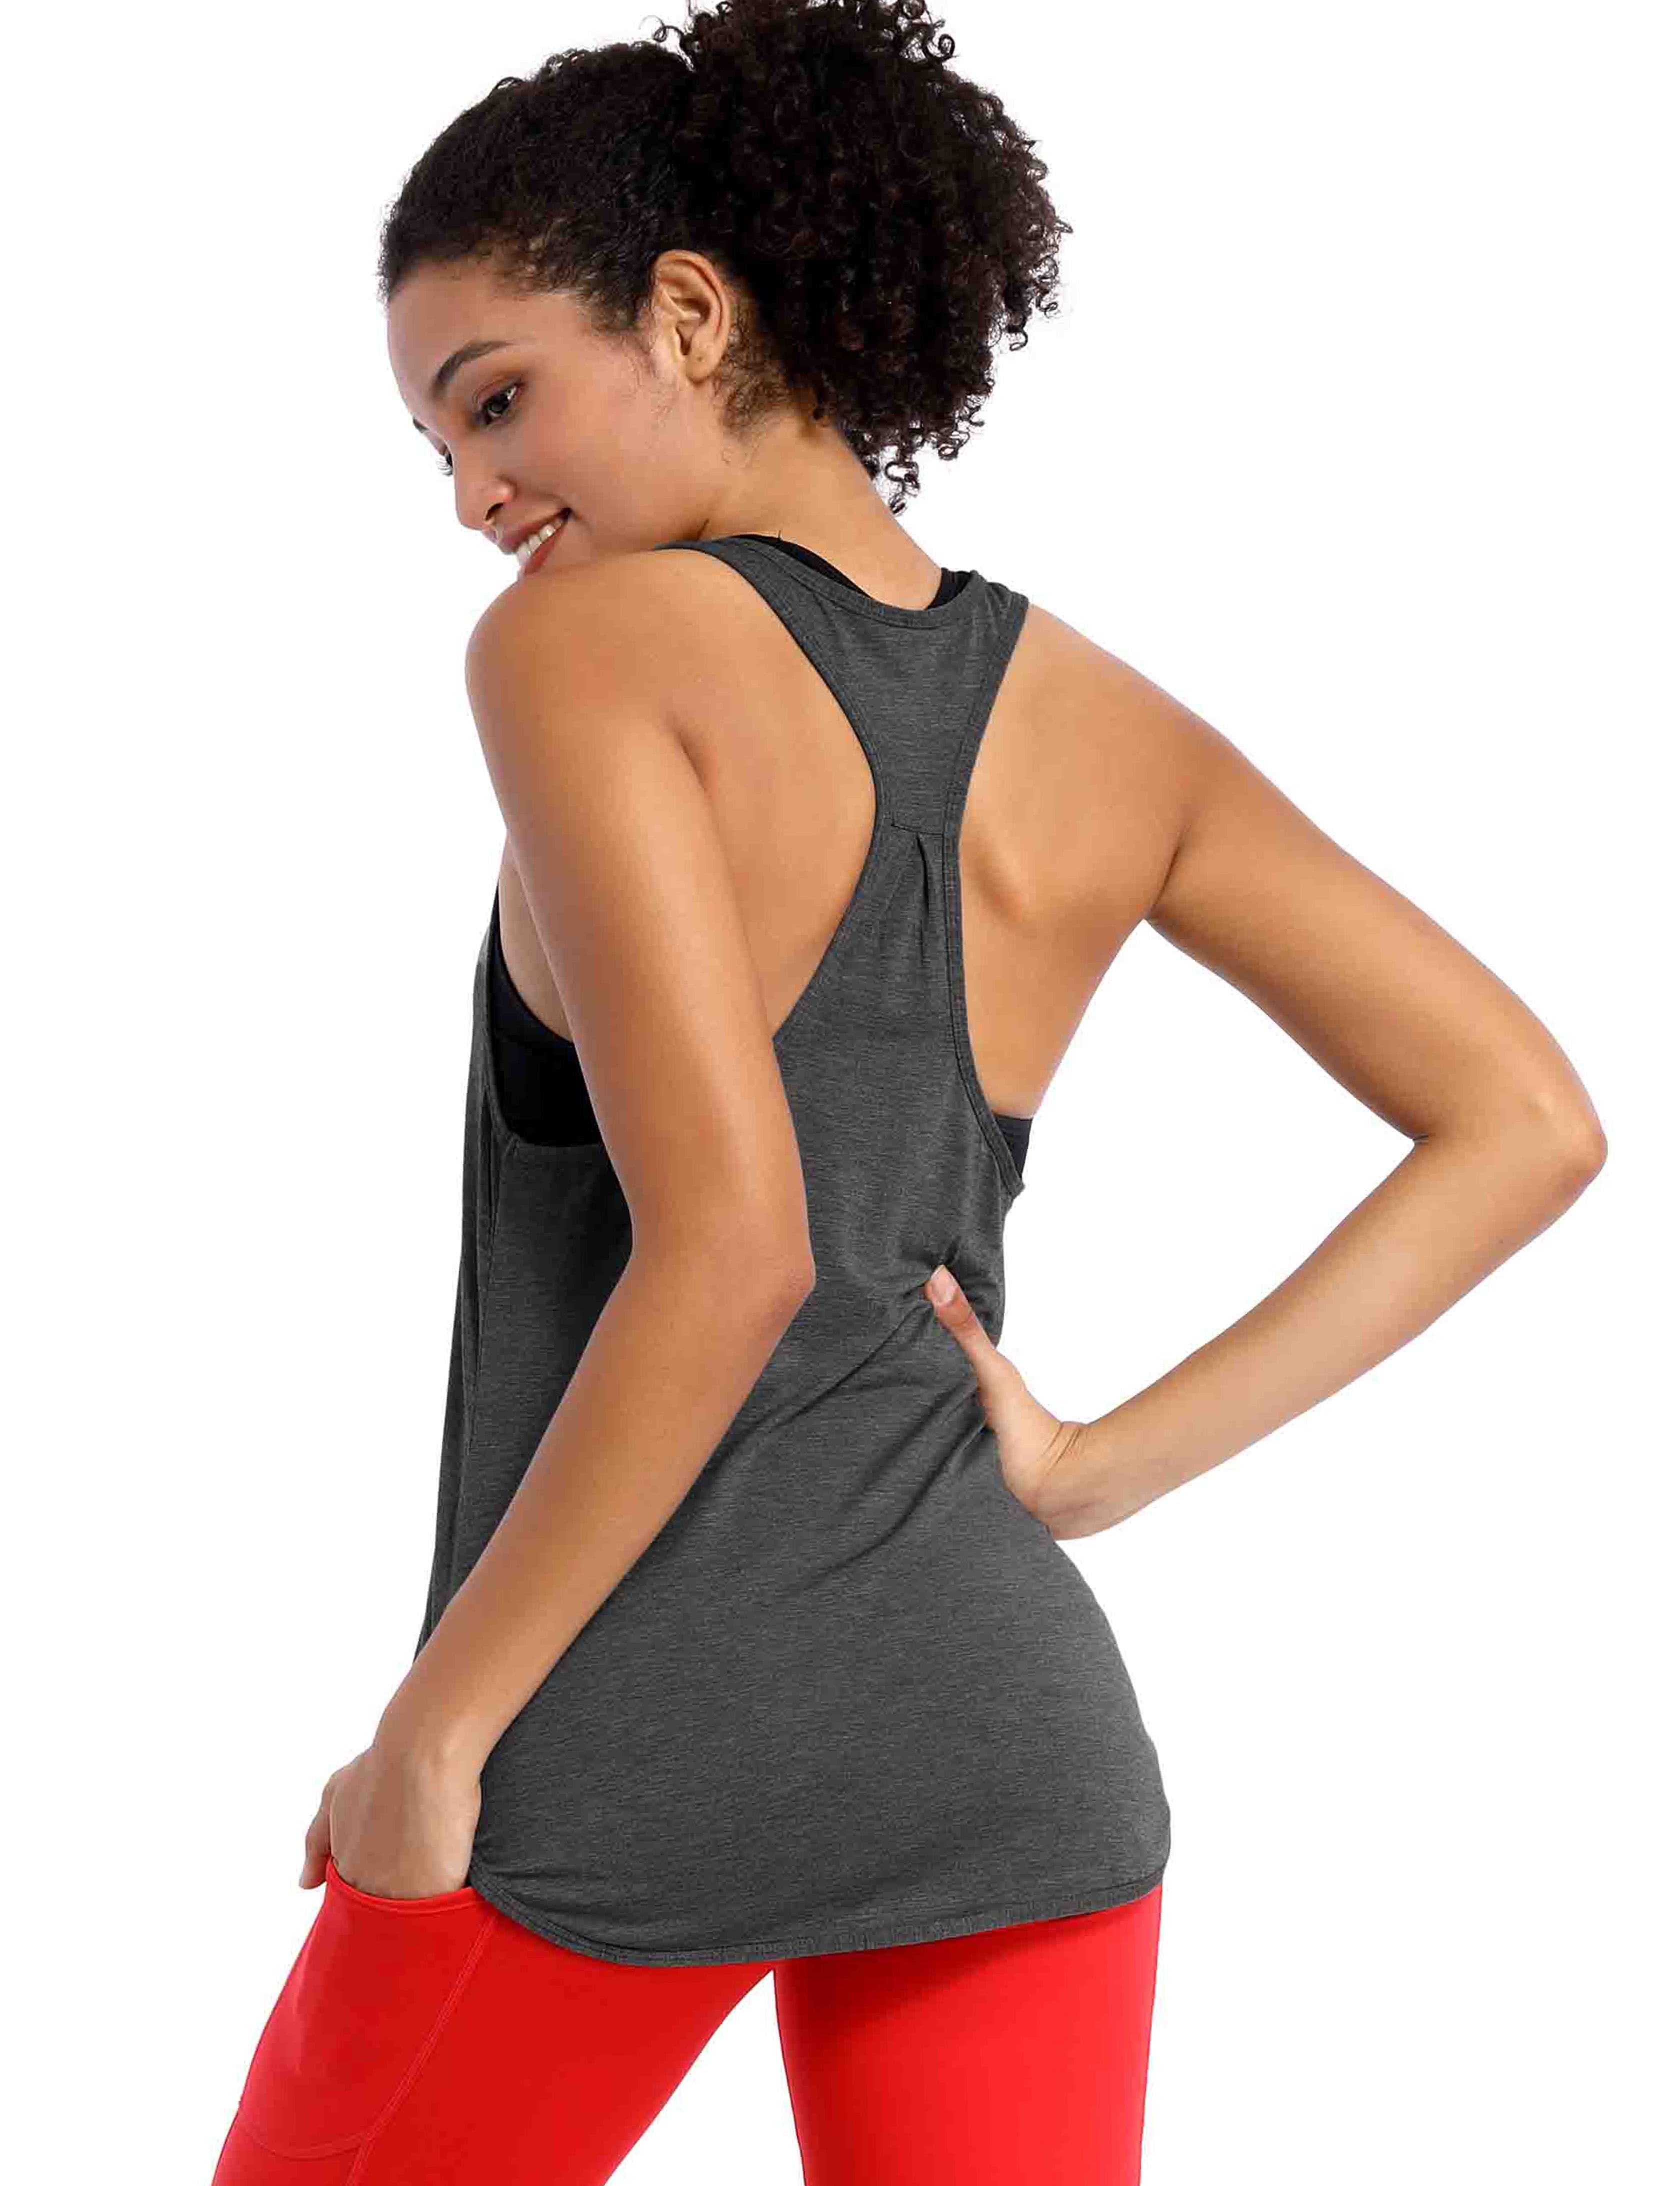 Loose Fit Racerback Tank Top heathercharcoal Designed for On the Move Loose fit 93%Modal/7%Spandex Four-way stretch Naturally breathable Super-Soft, Modal Fabric